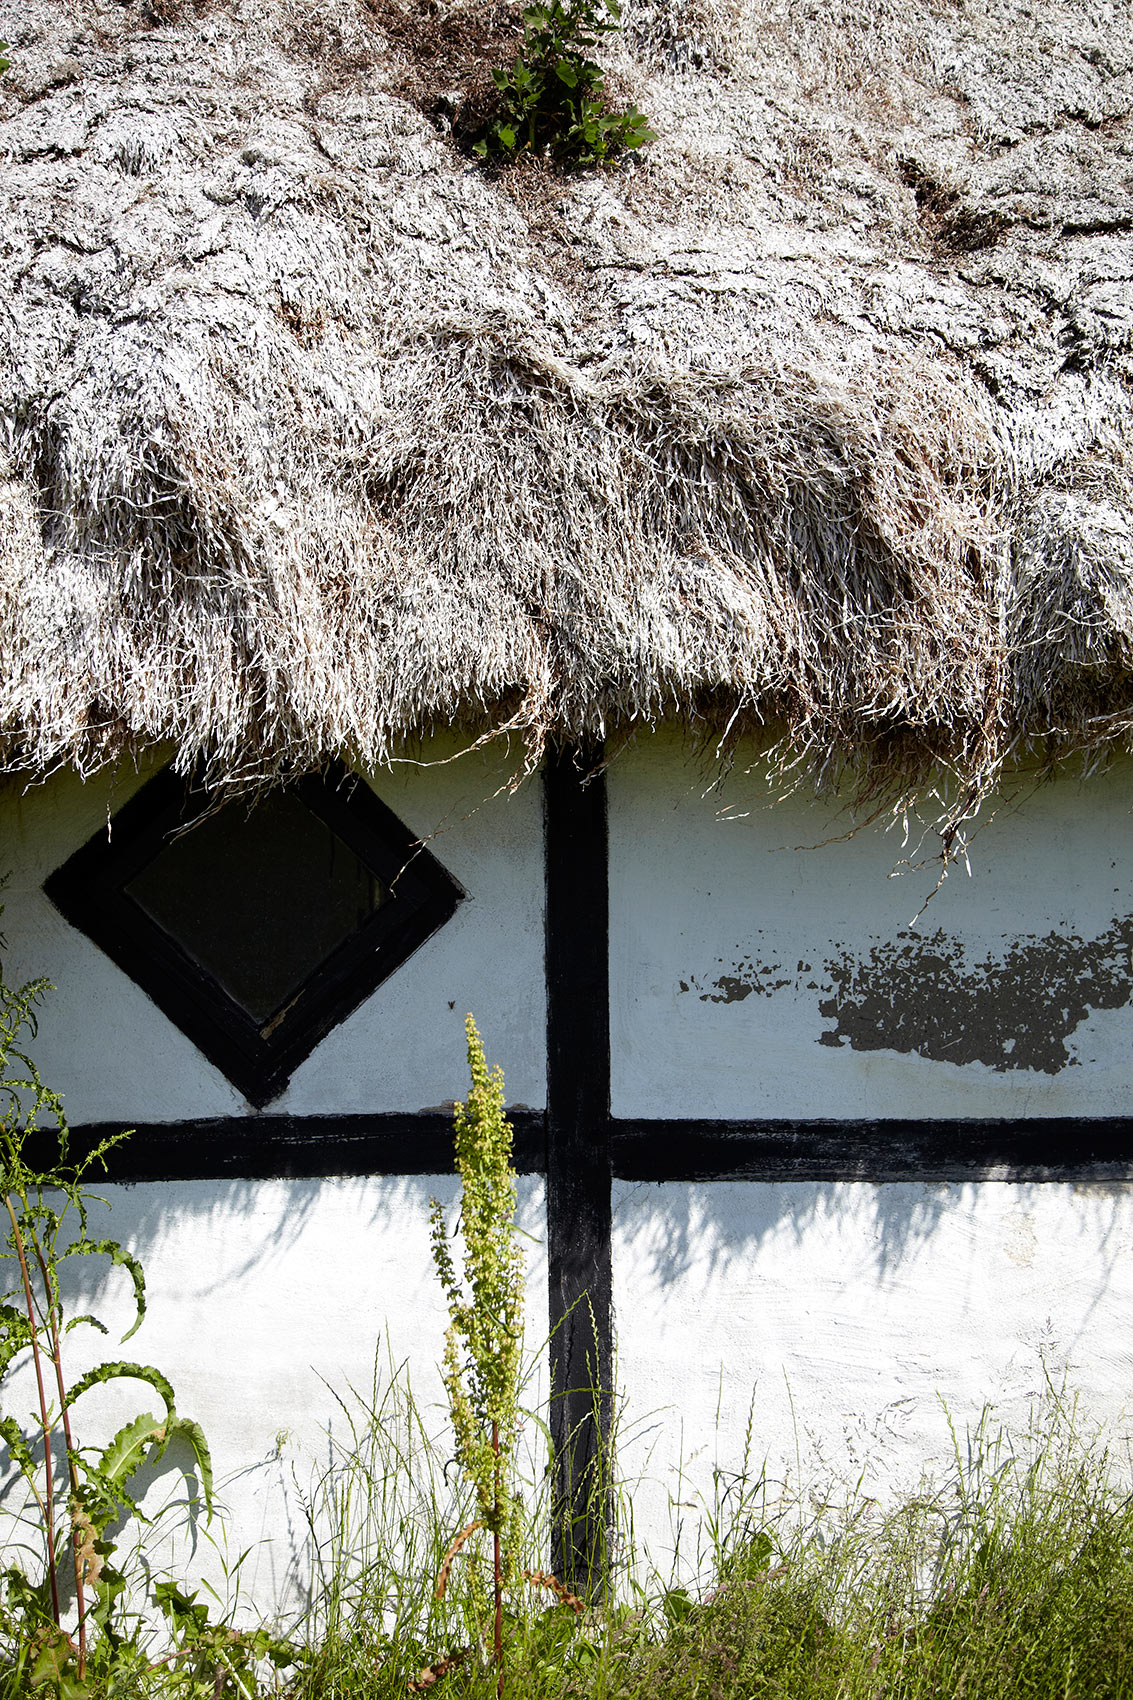 Laesoe Salt • Thatched Roof Danish House with White Cladding • Advertising & Lifestyle Food Photography